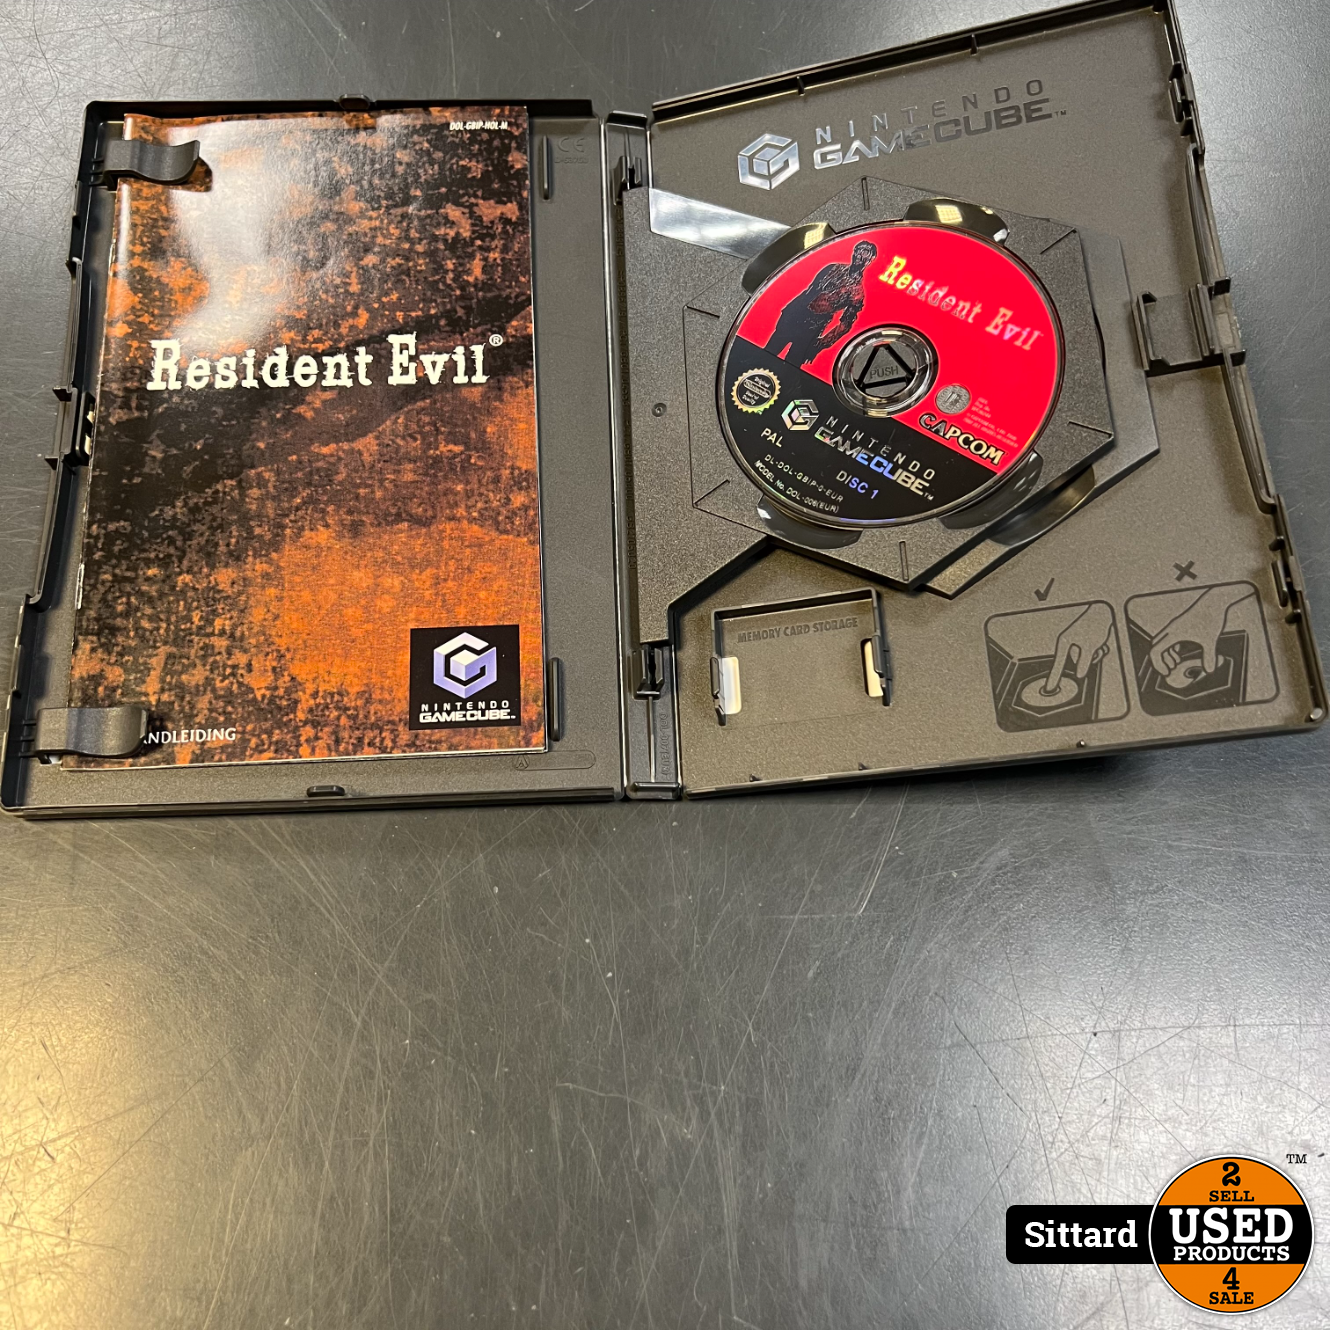 Game Cube Game - Resident evil - Used Products Sittard